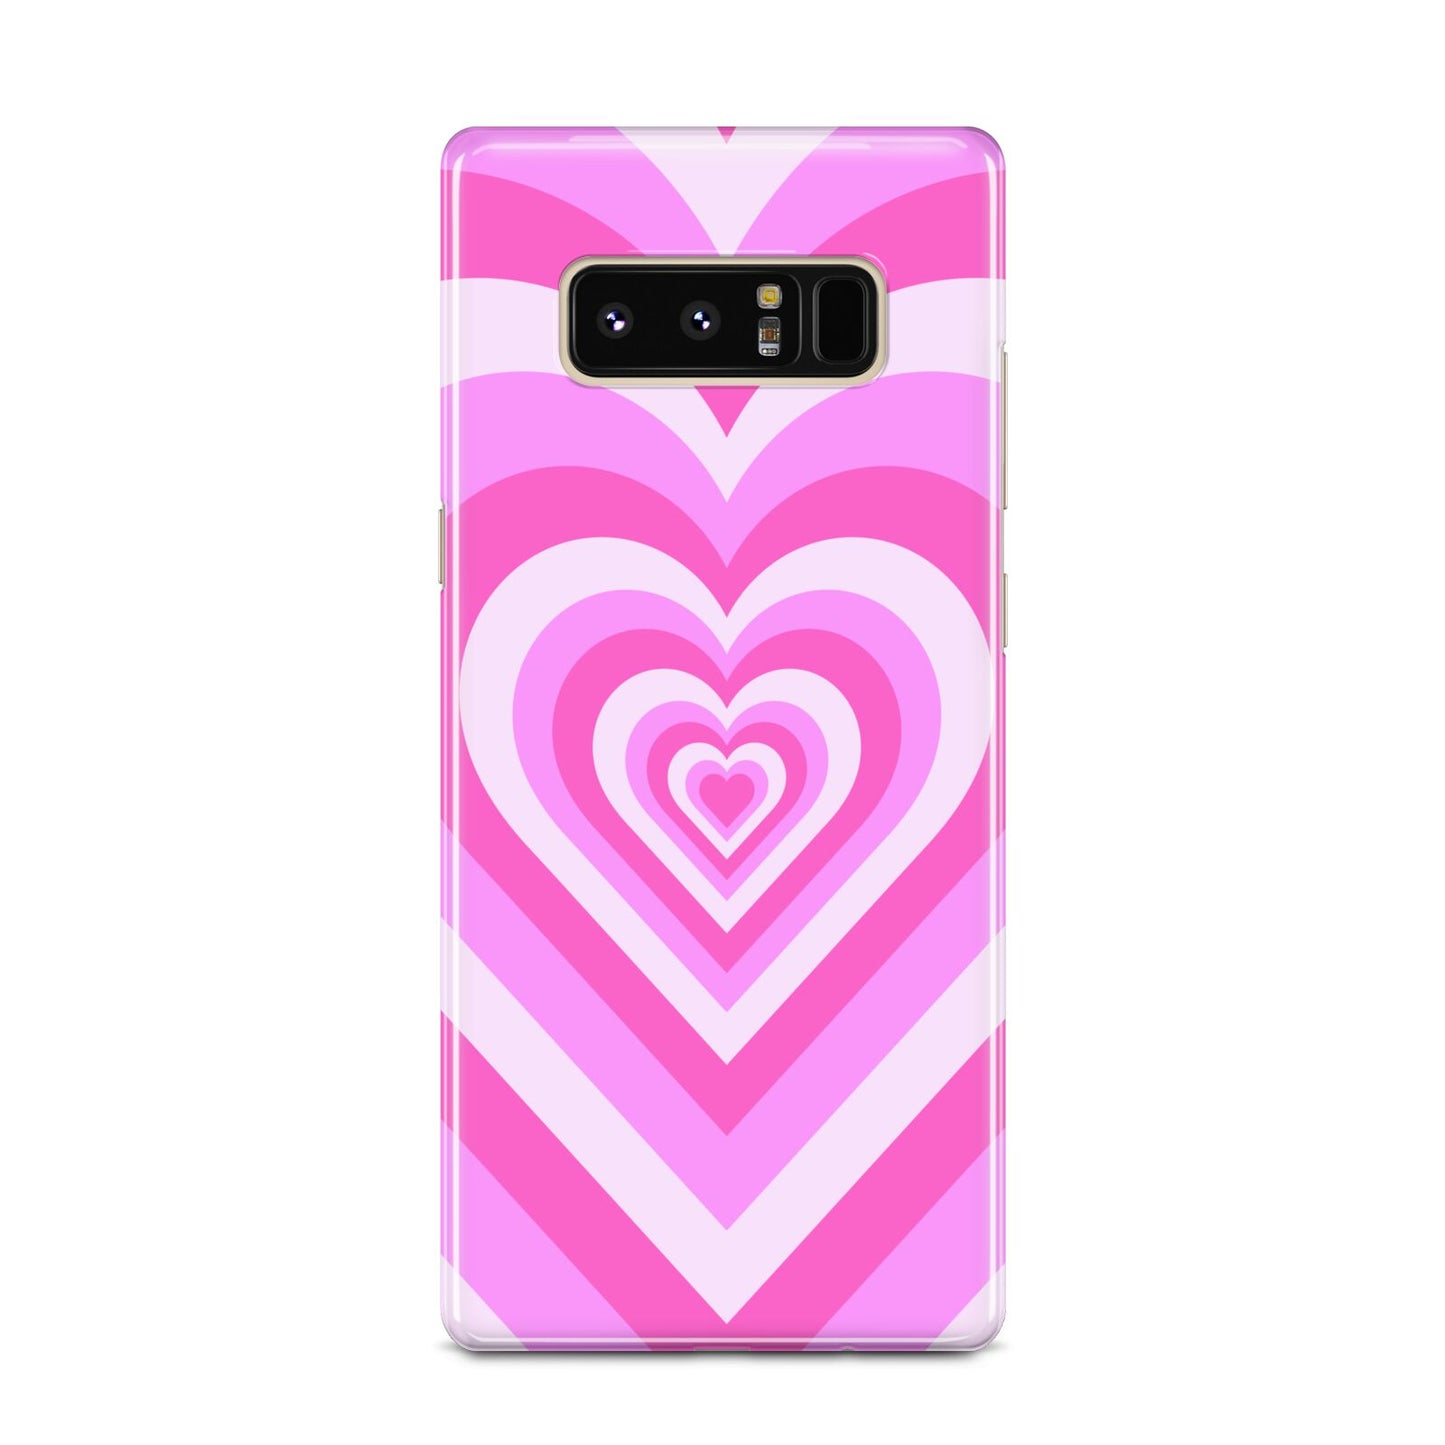 Aesthetic Heart Samsung Galaxy Note 8 Case